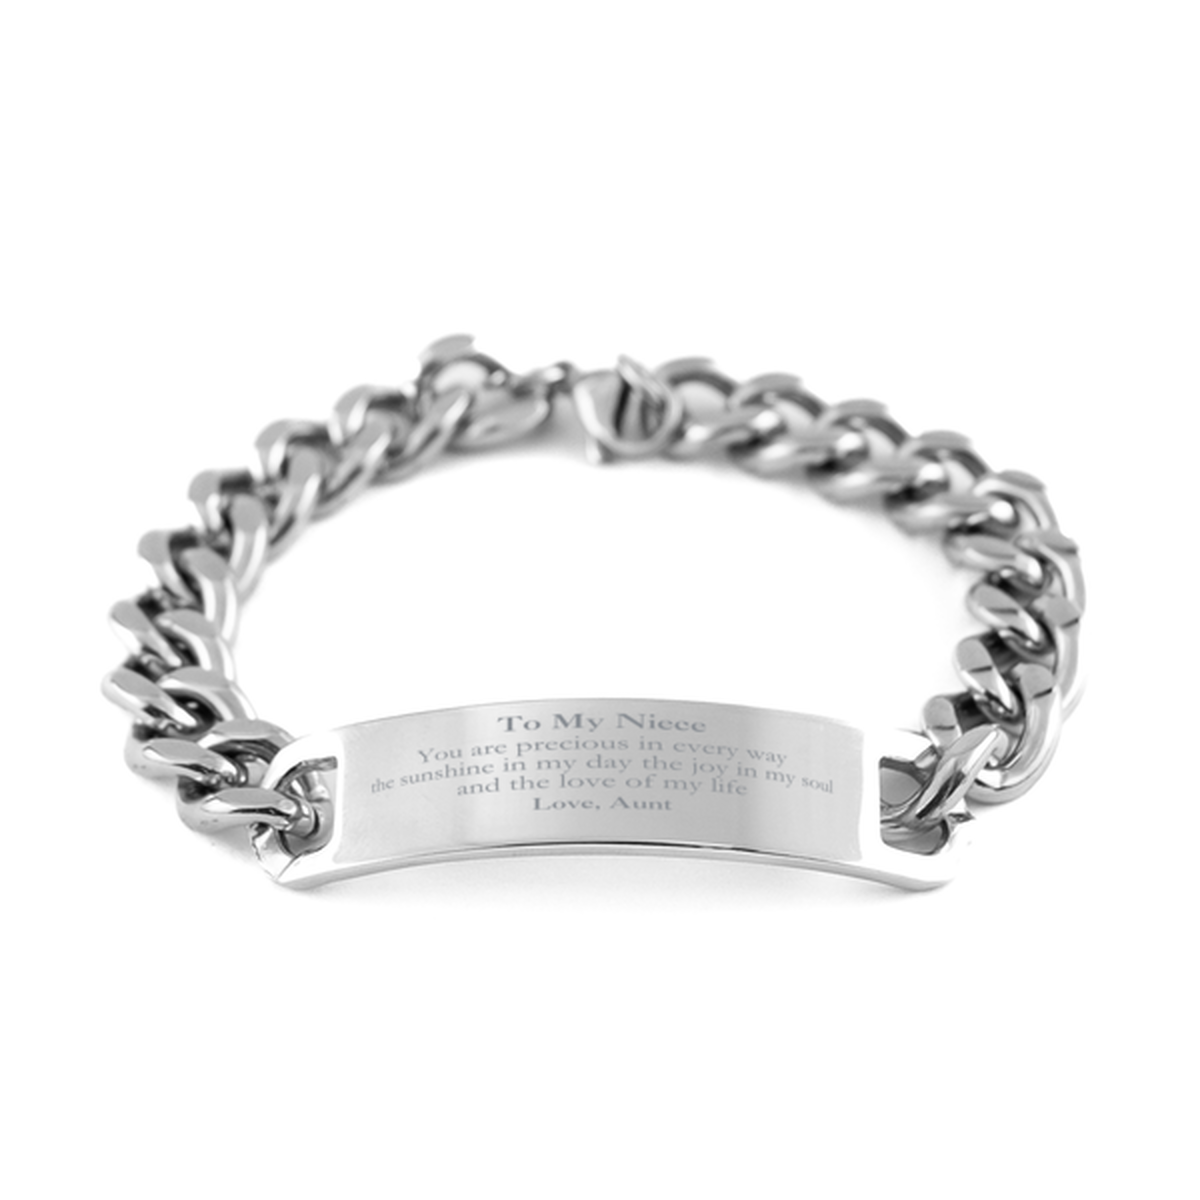 Graduation Gifts for Niece Cuban Chain Stainless Steel Bracelet Present from Aunt, Christmas Niece Birthday Gifts Niece You are precious in every way the sunshine in my day. Love, Aunt